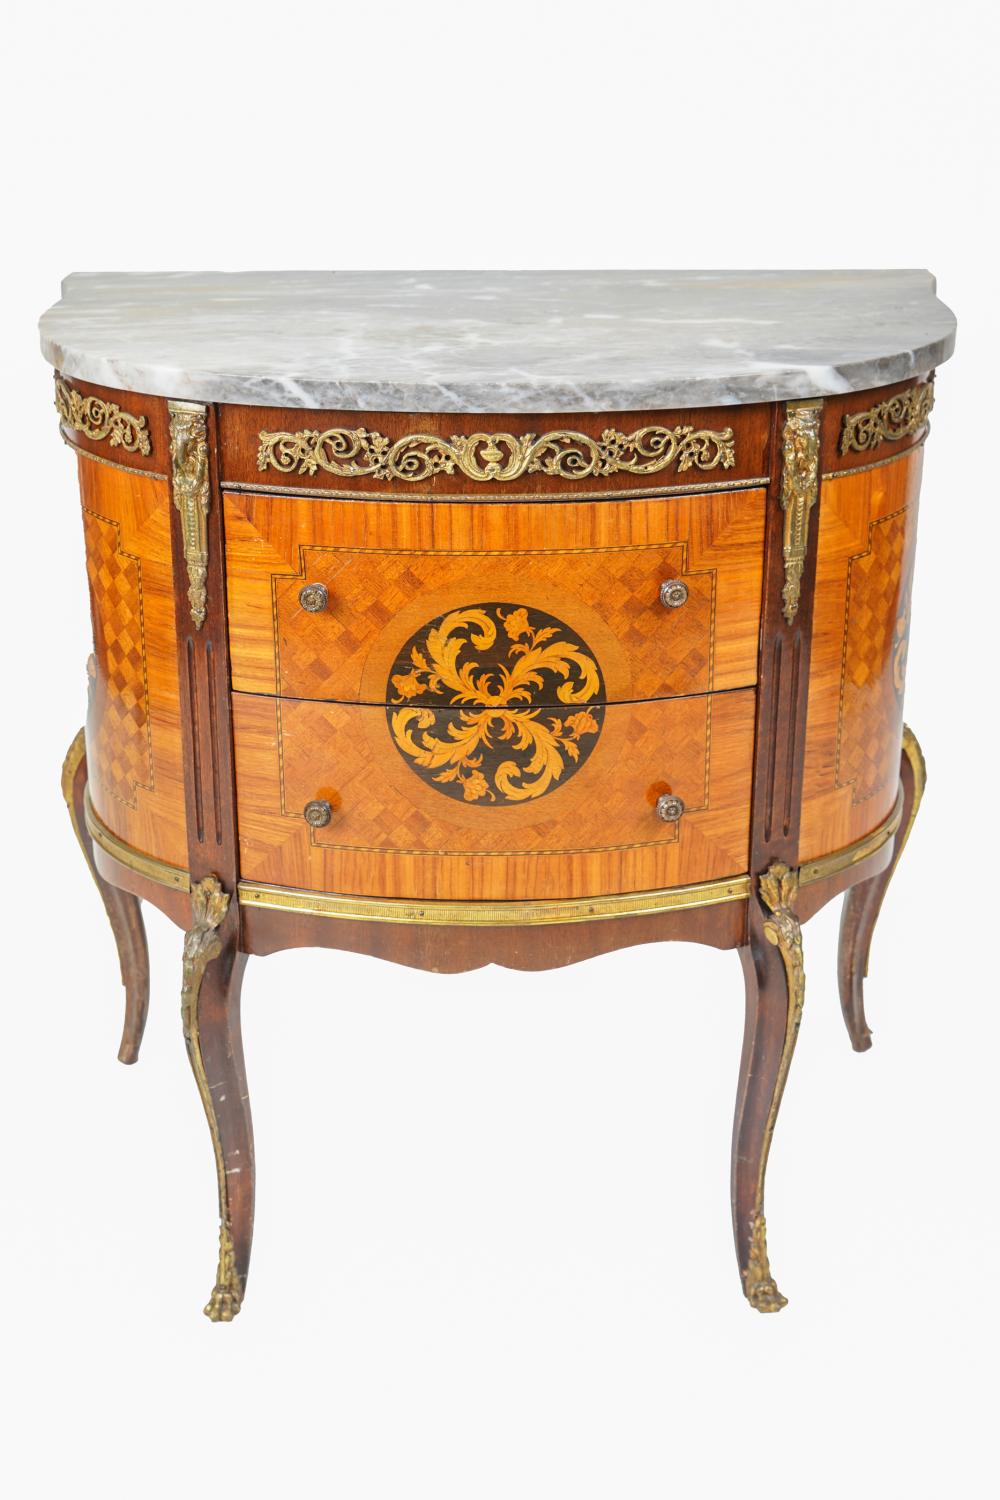 FRENCH MARBLE-TOP INLAID COMMODEwith